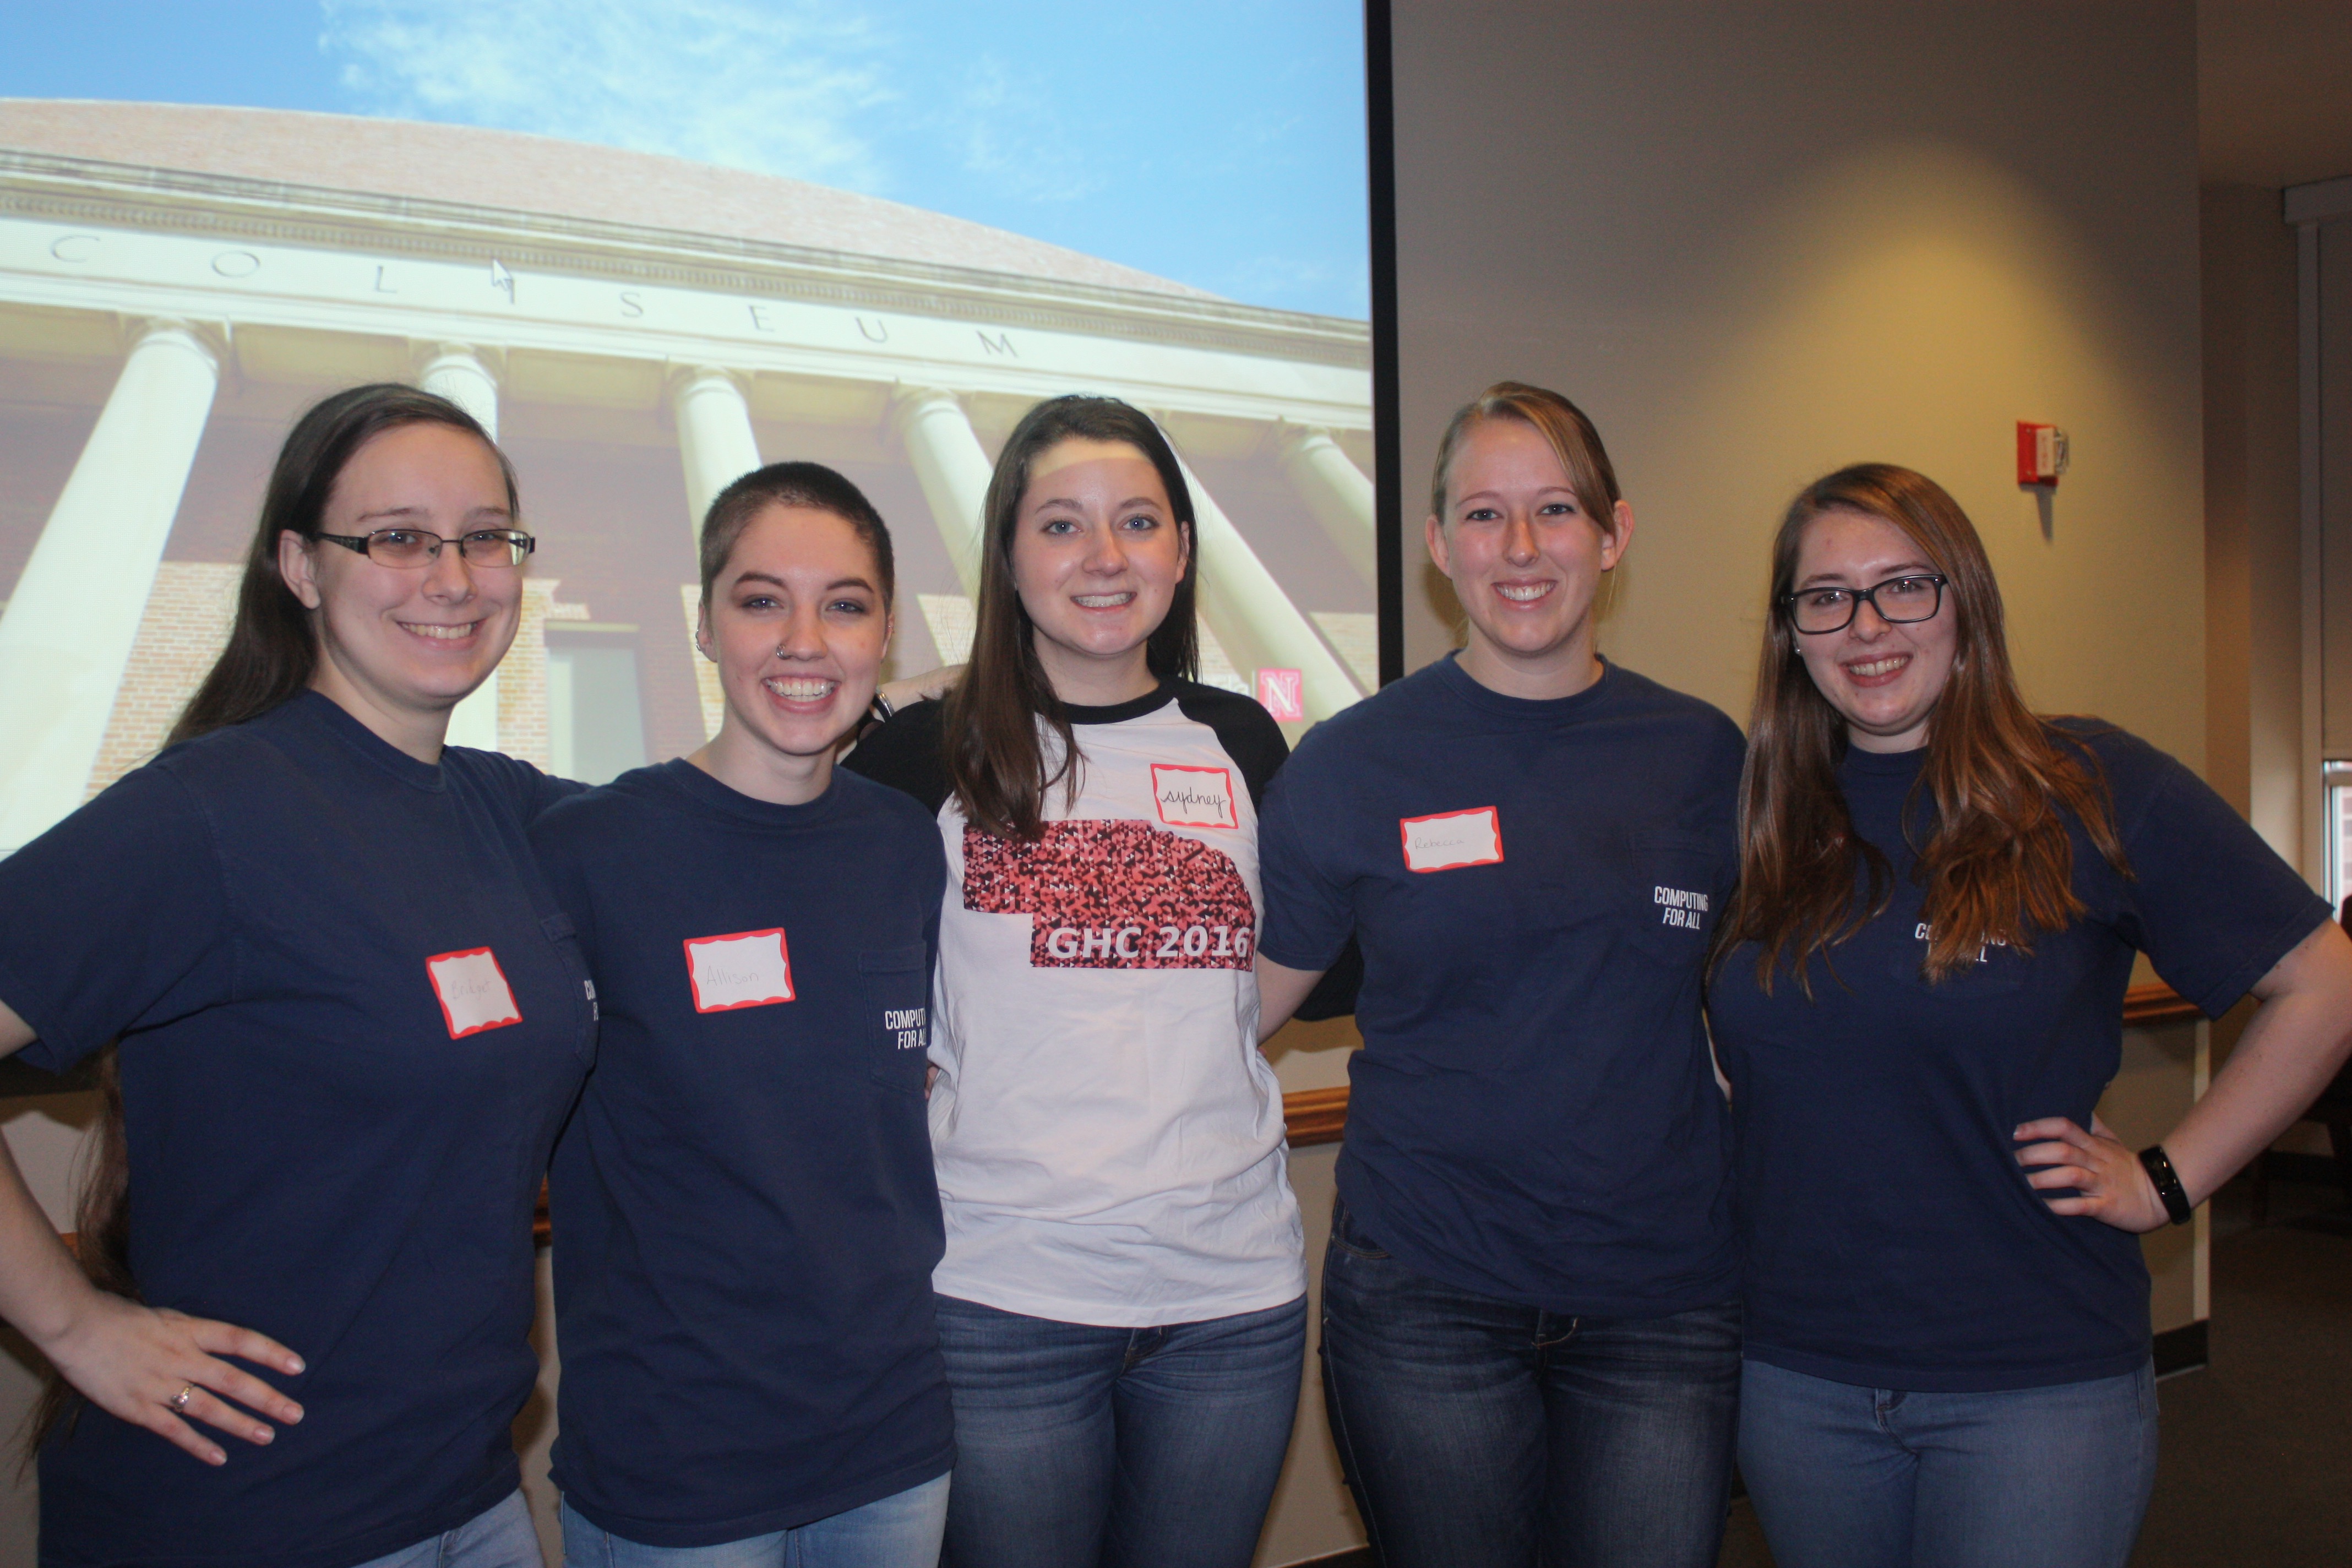 Computing for All members and CSE students Bridget Bailey, Allison Buckley, Sydney Goldberg, Rebecca Dahlman, and Melanie Powell serving as student mentors at the Girl Scouts CS Unplugged event.